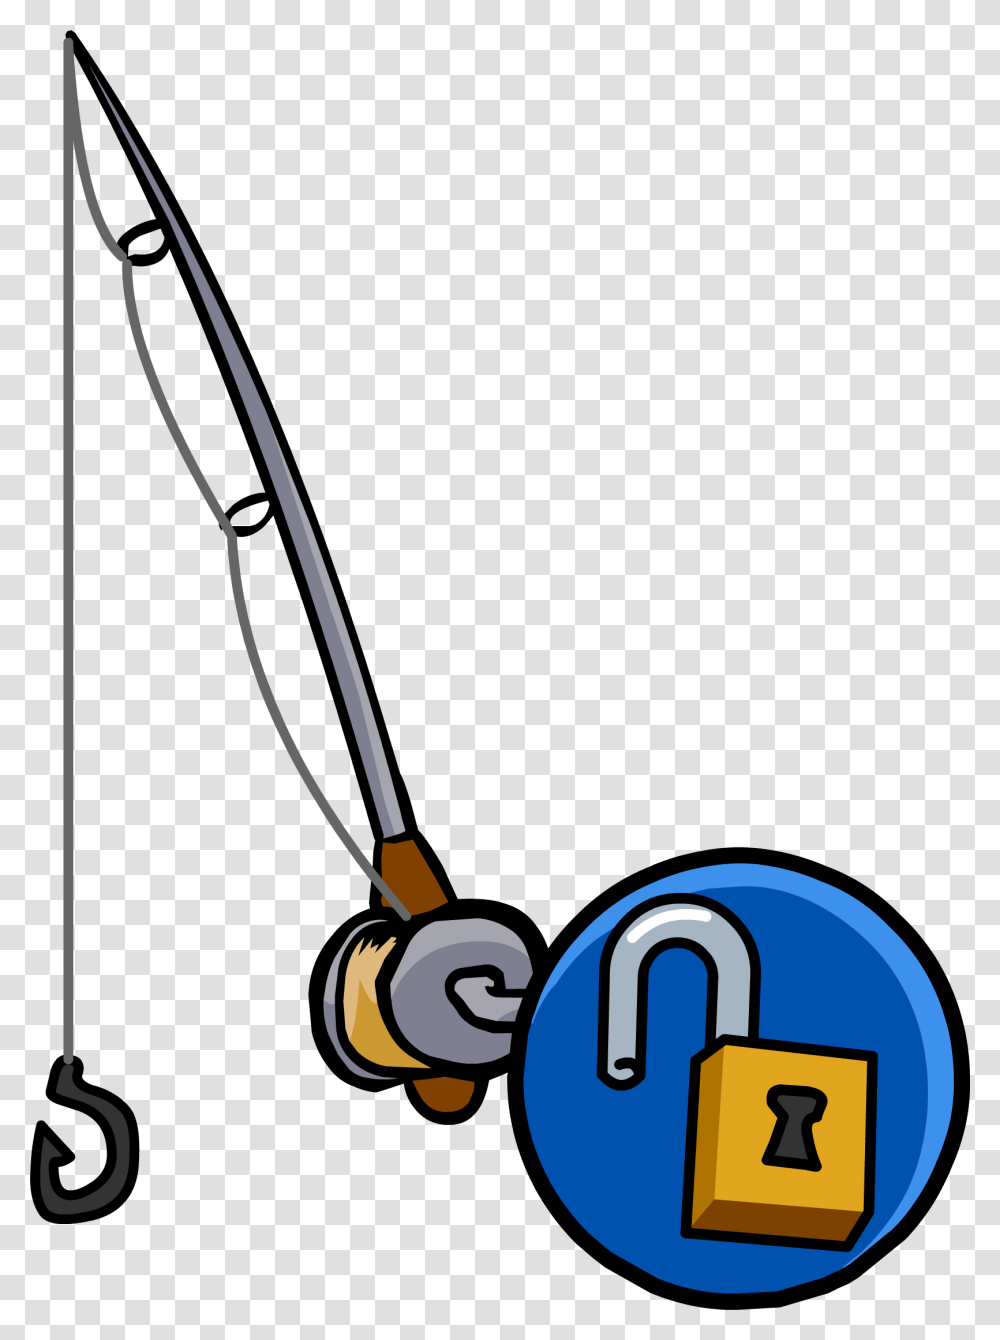 Club Penguin Wiki, Bow, Security, Lawn Mower, Tool Transparent Png